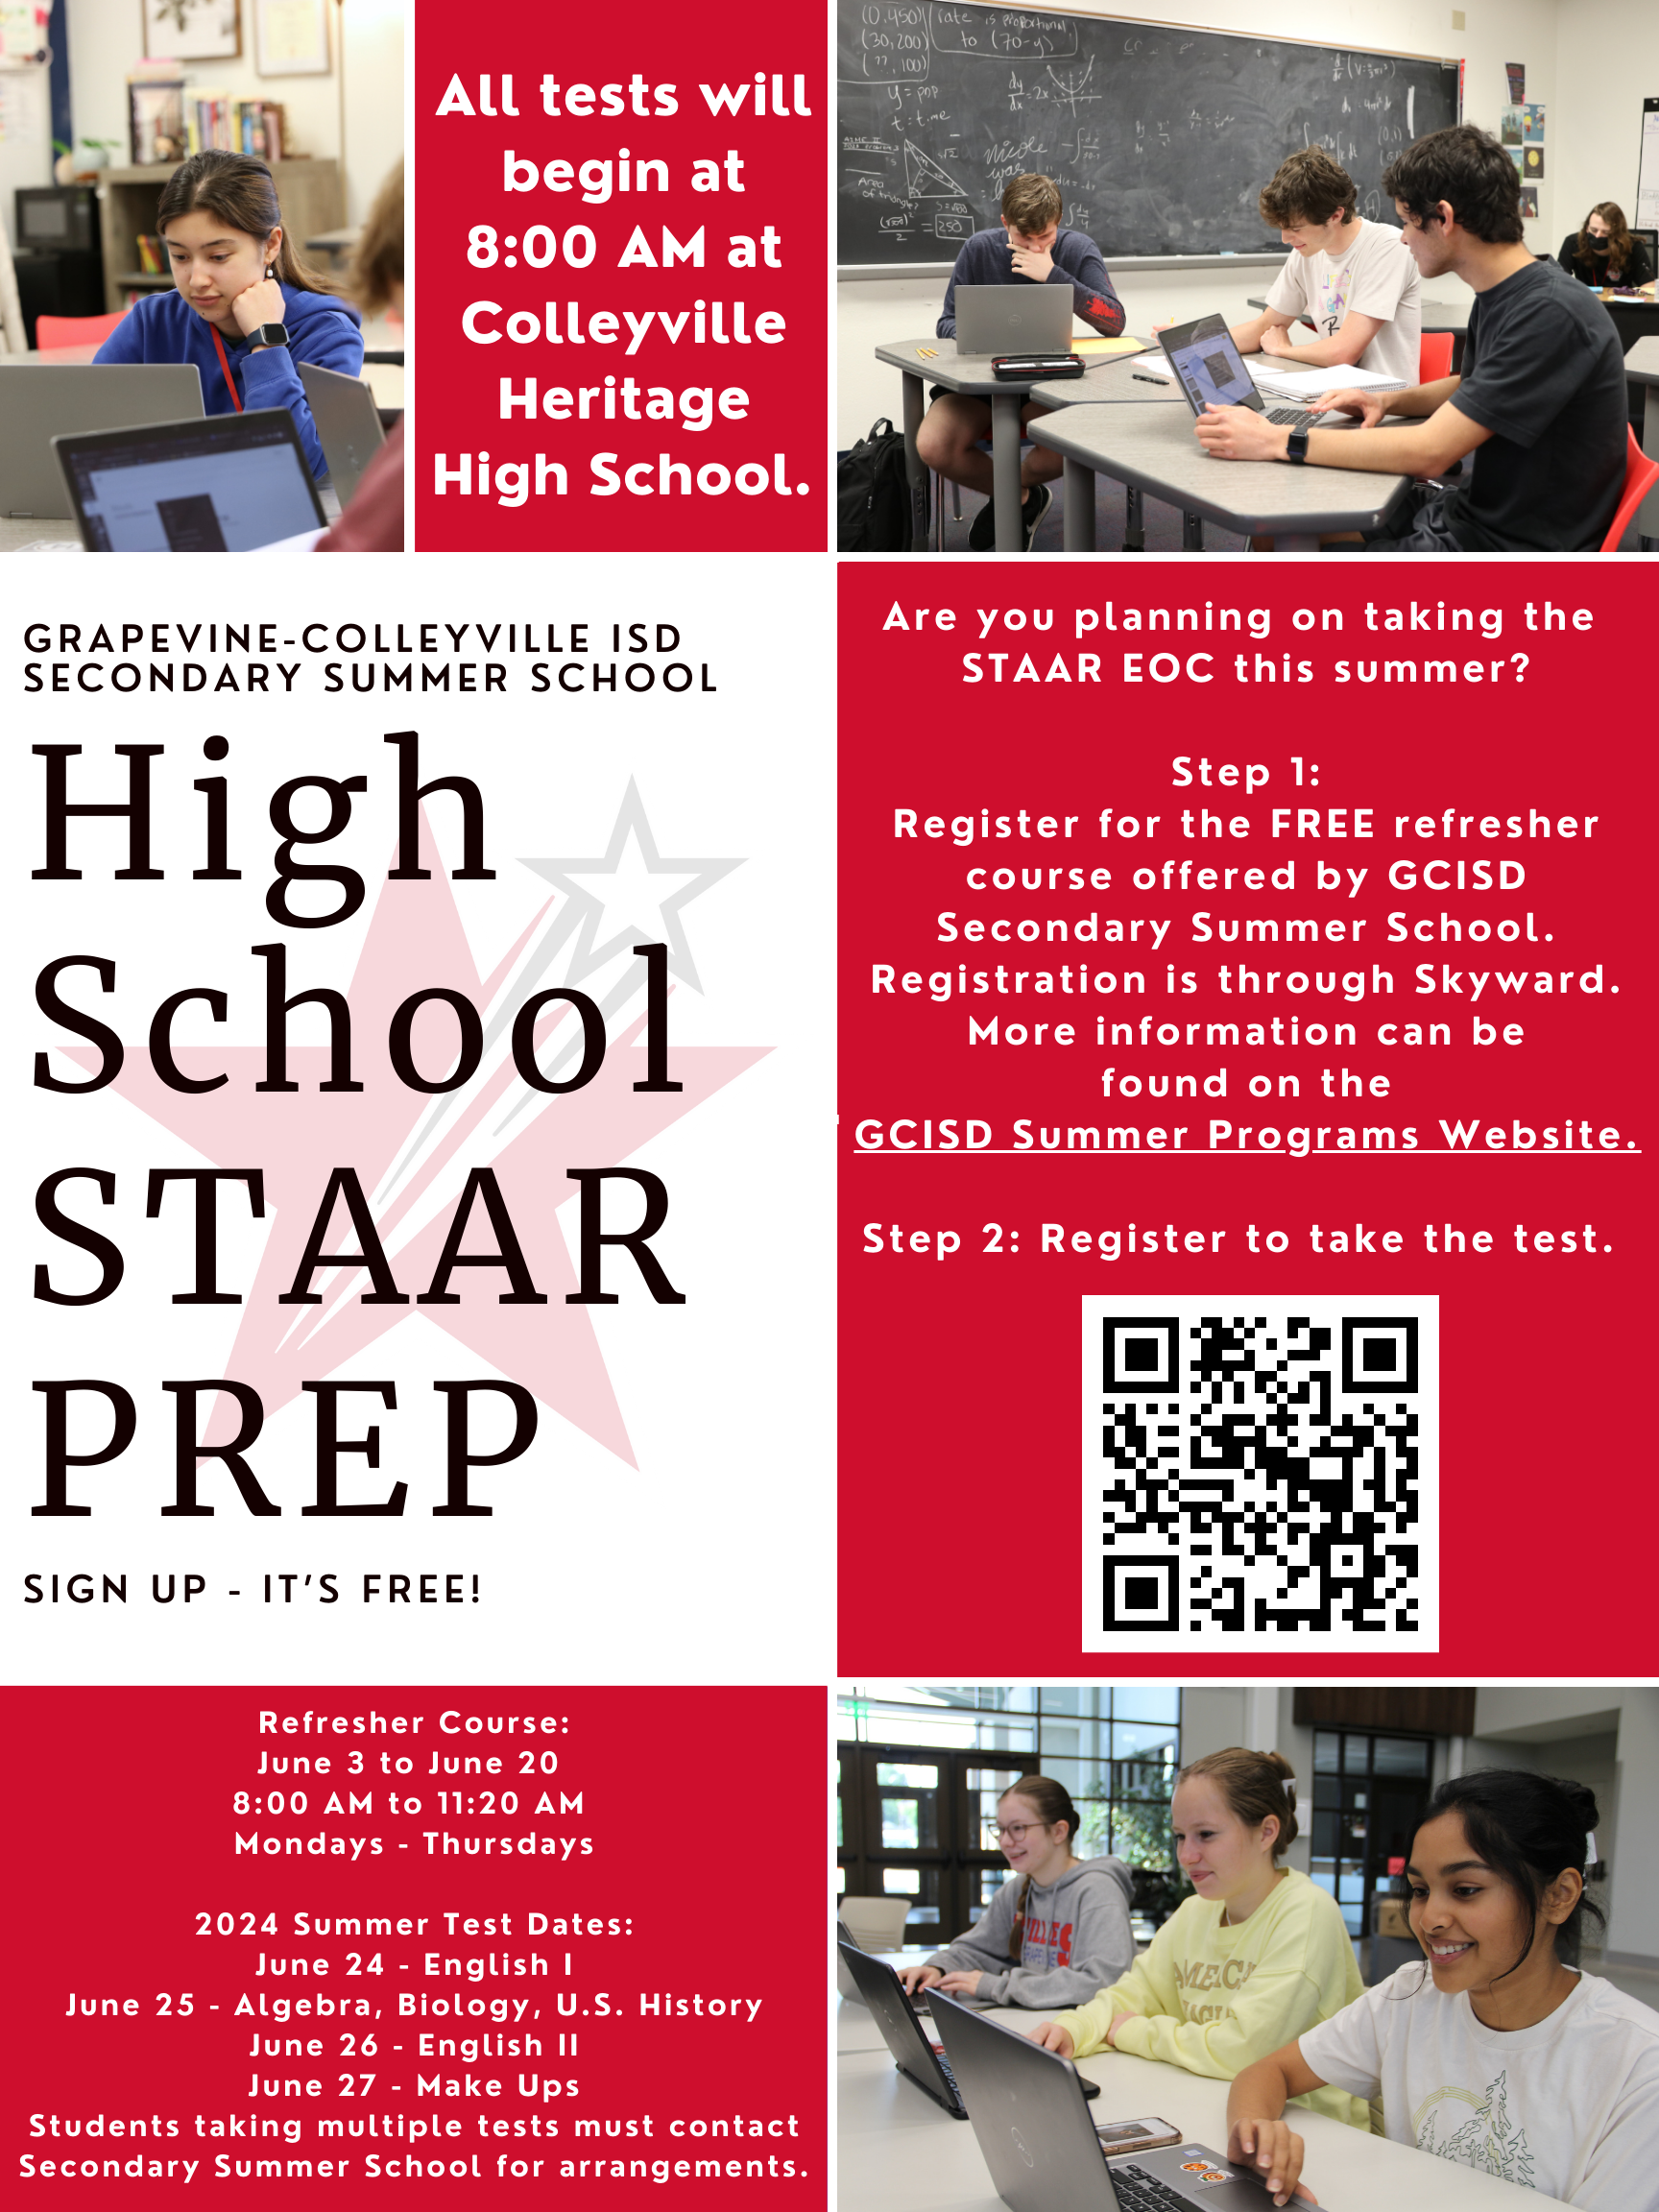 Click the link below this picture to view the full PDF of the High School STAAR Prep Flyer